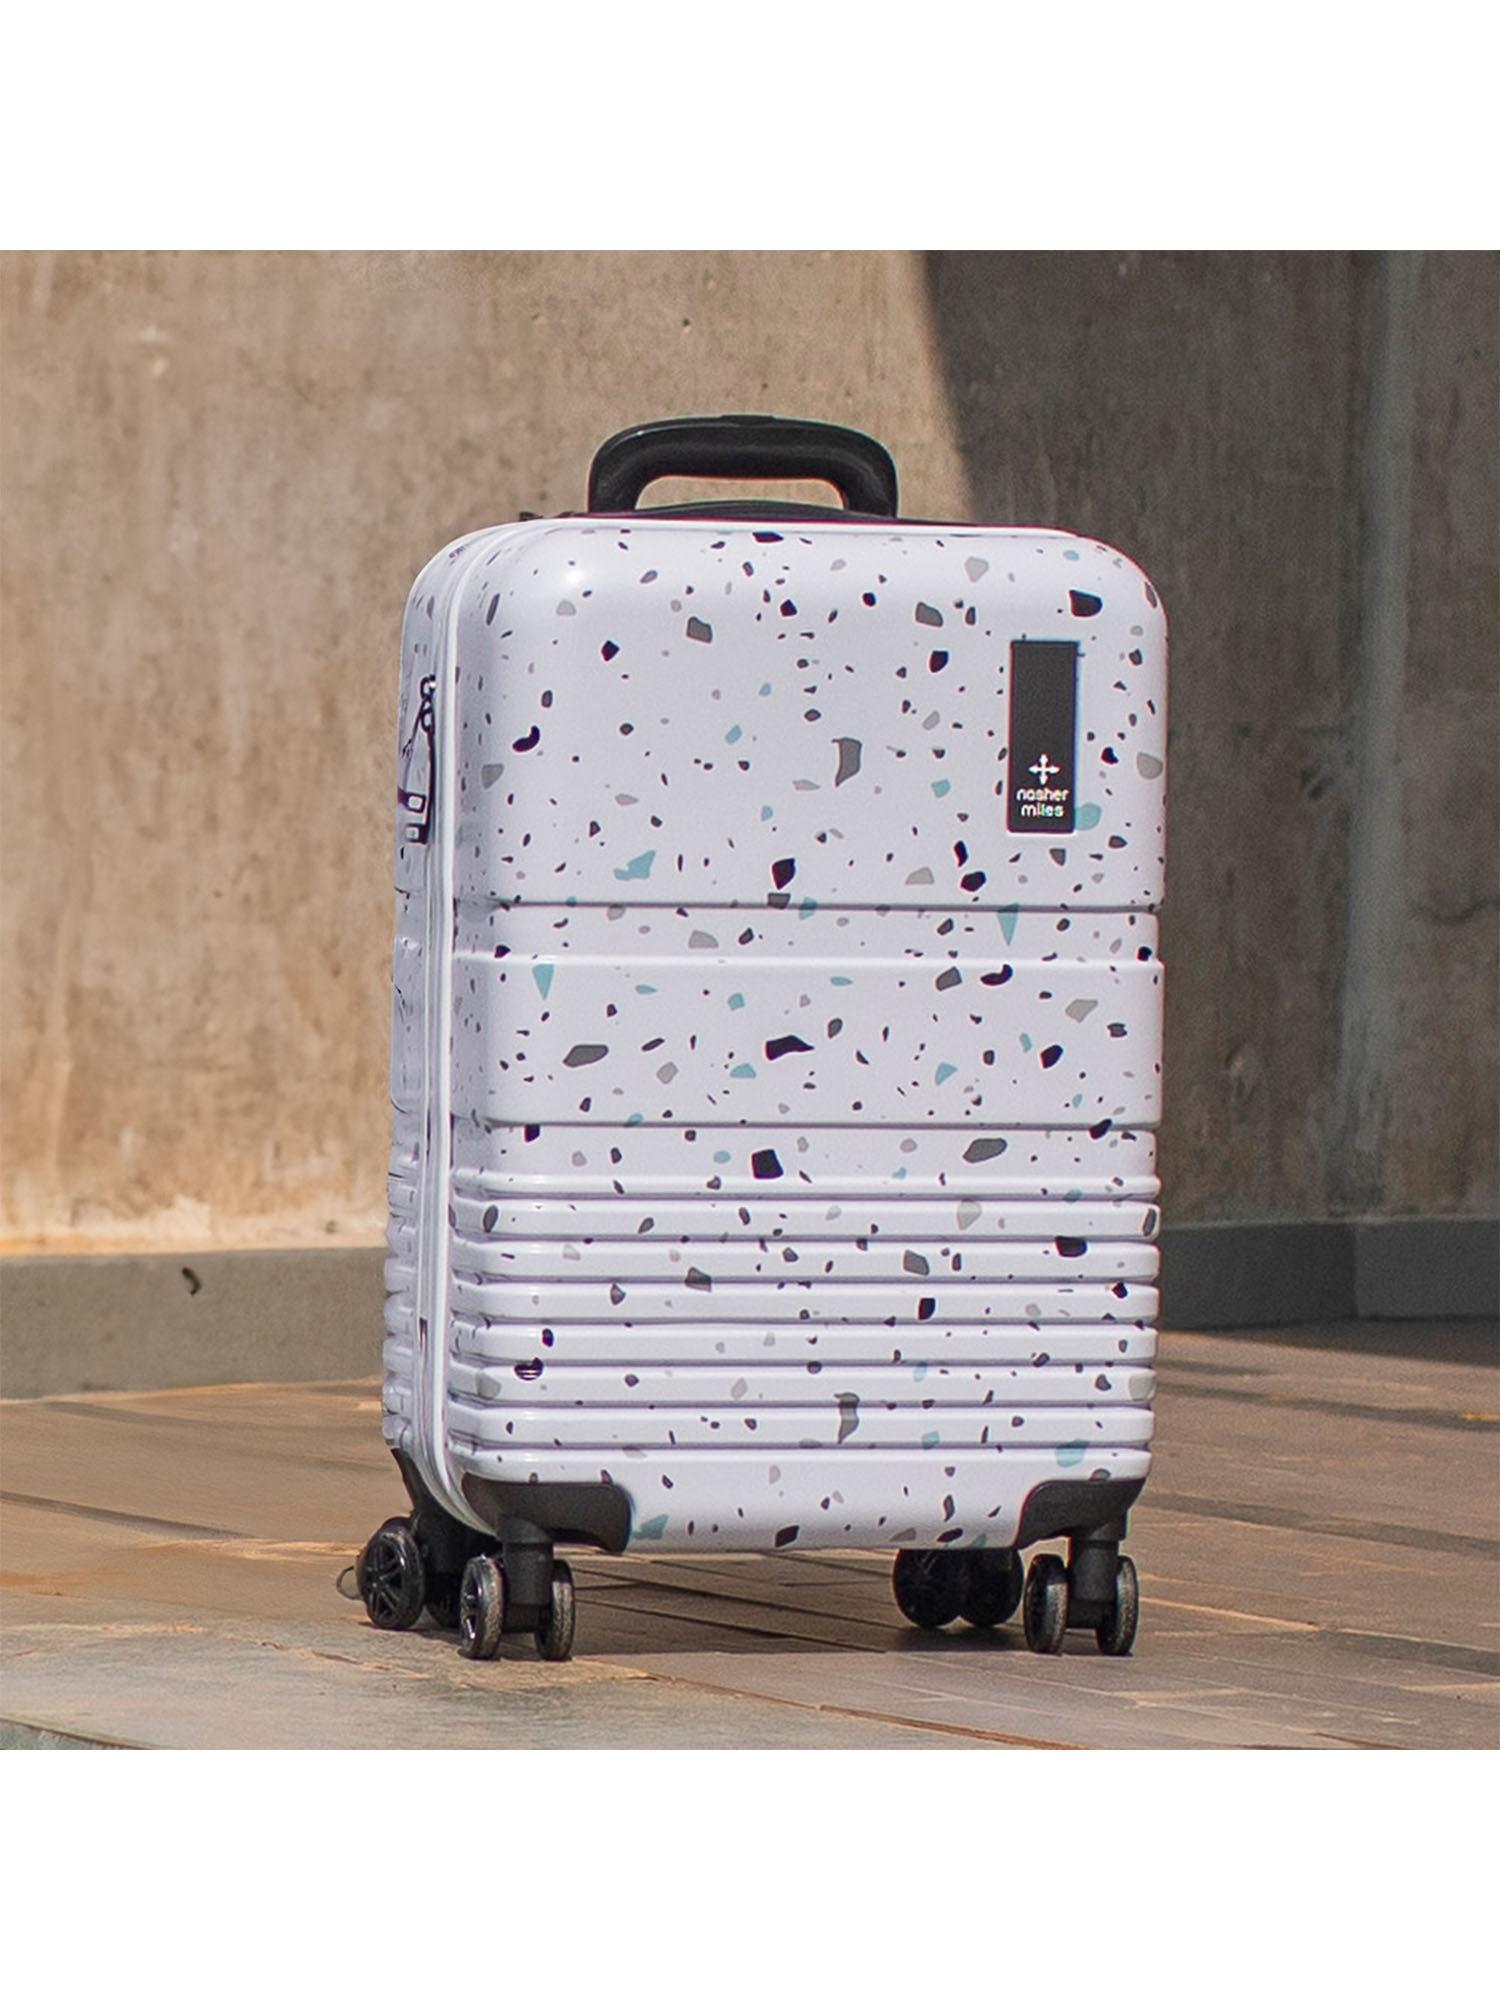 venice hard-sided polycarbonate cabin luggage terrazzo printed black trolley bag